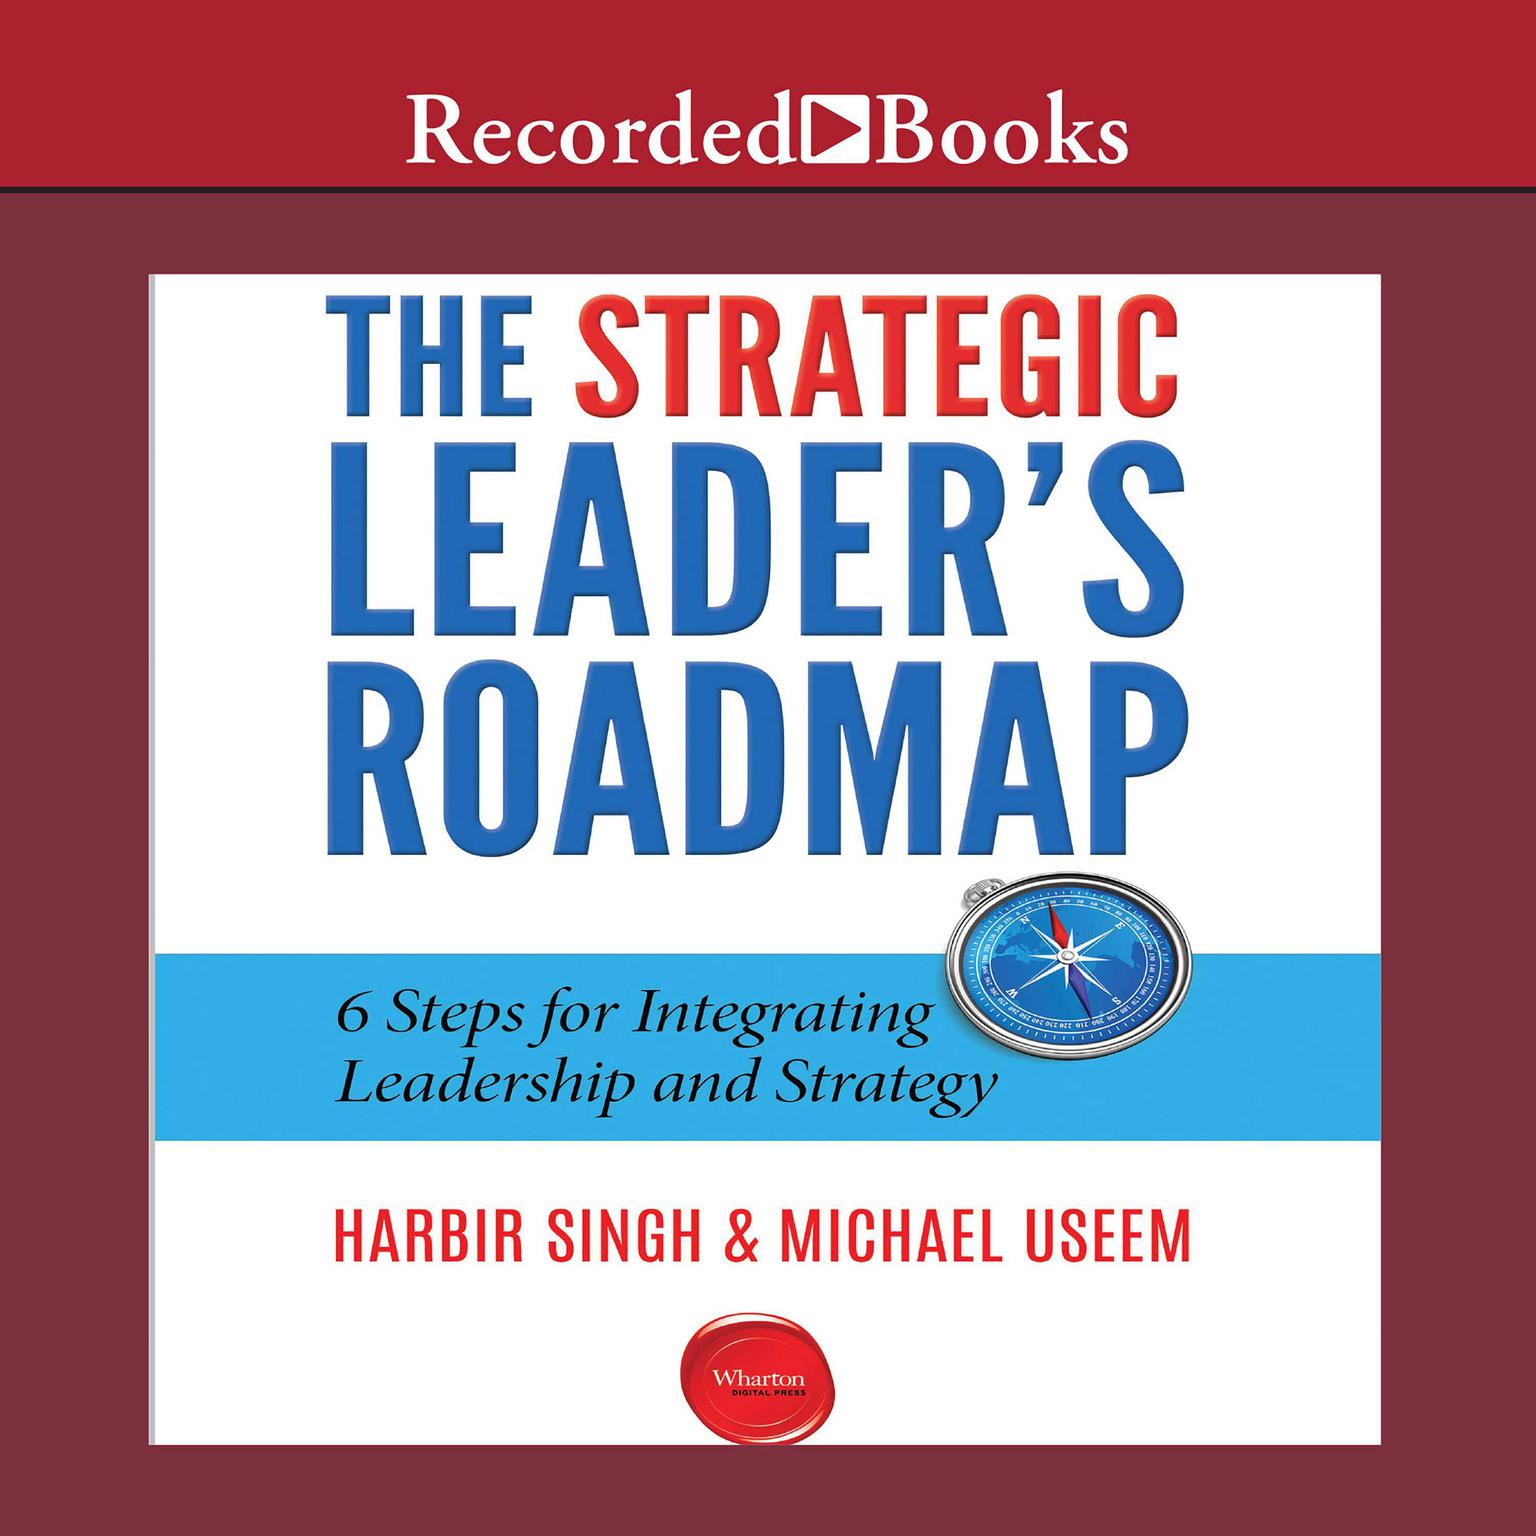 The Strategic Leaders Roadmap: 6 Steps for Integrating Leadership and Strategy Audiobook, by Michael Useem